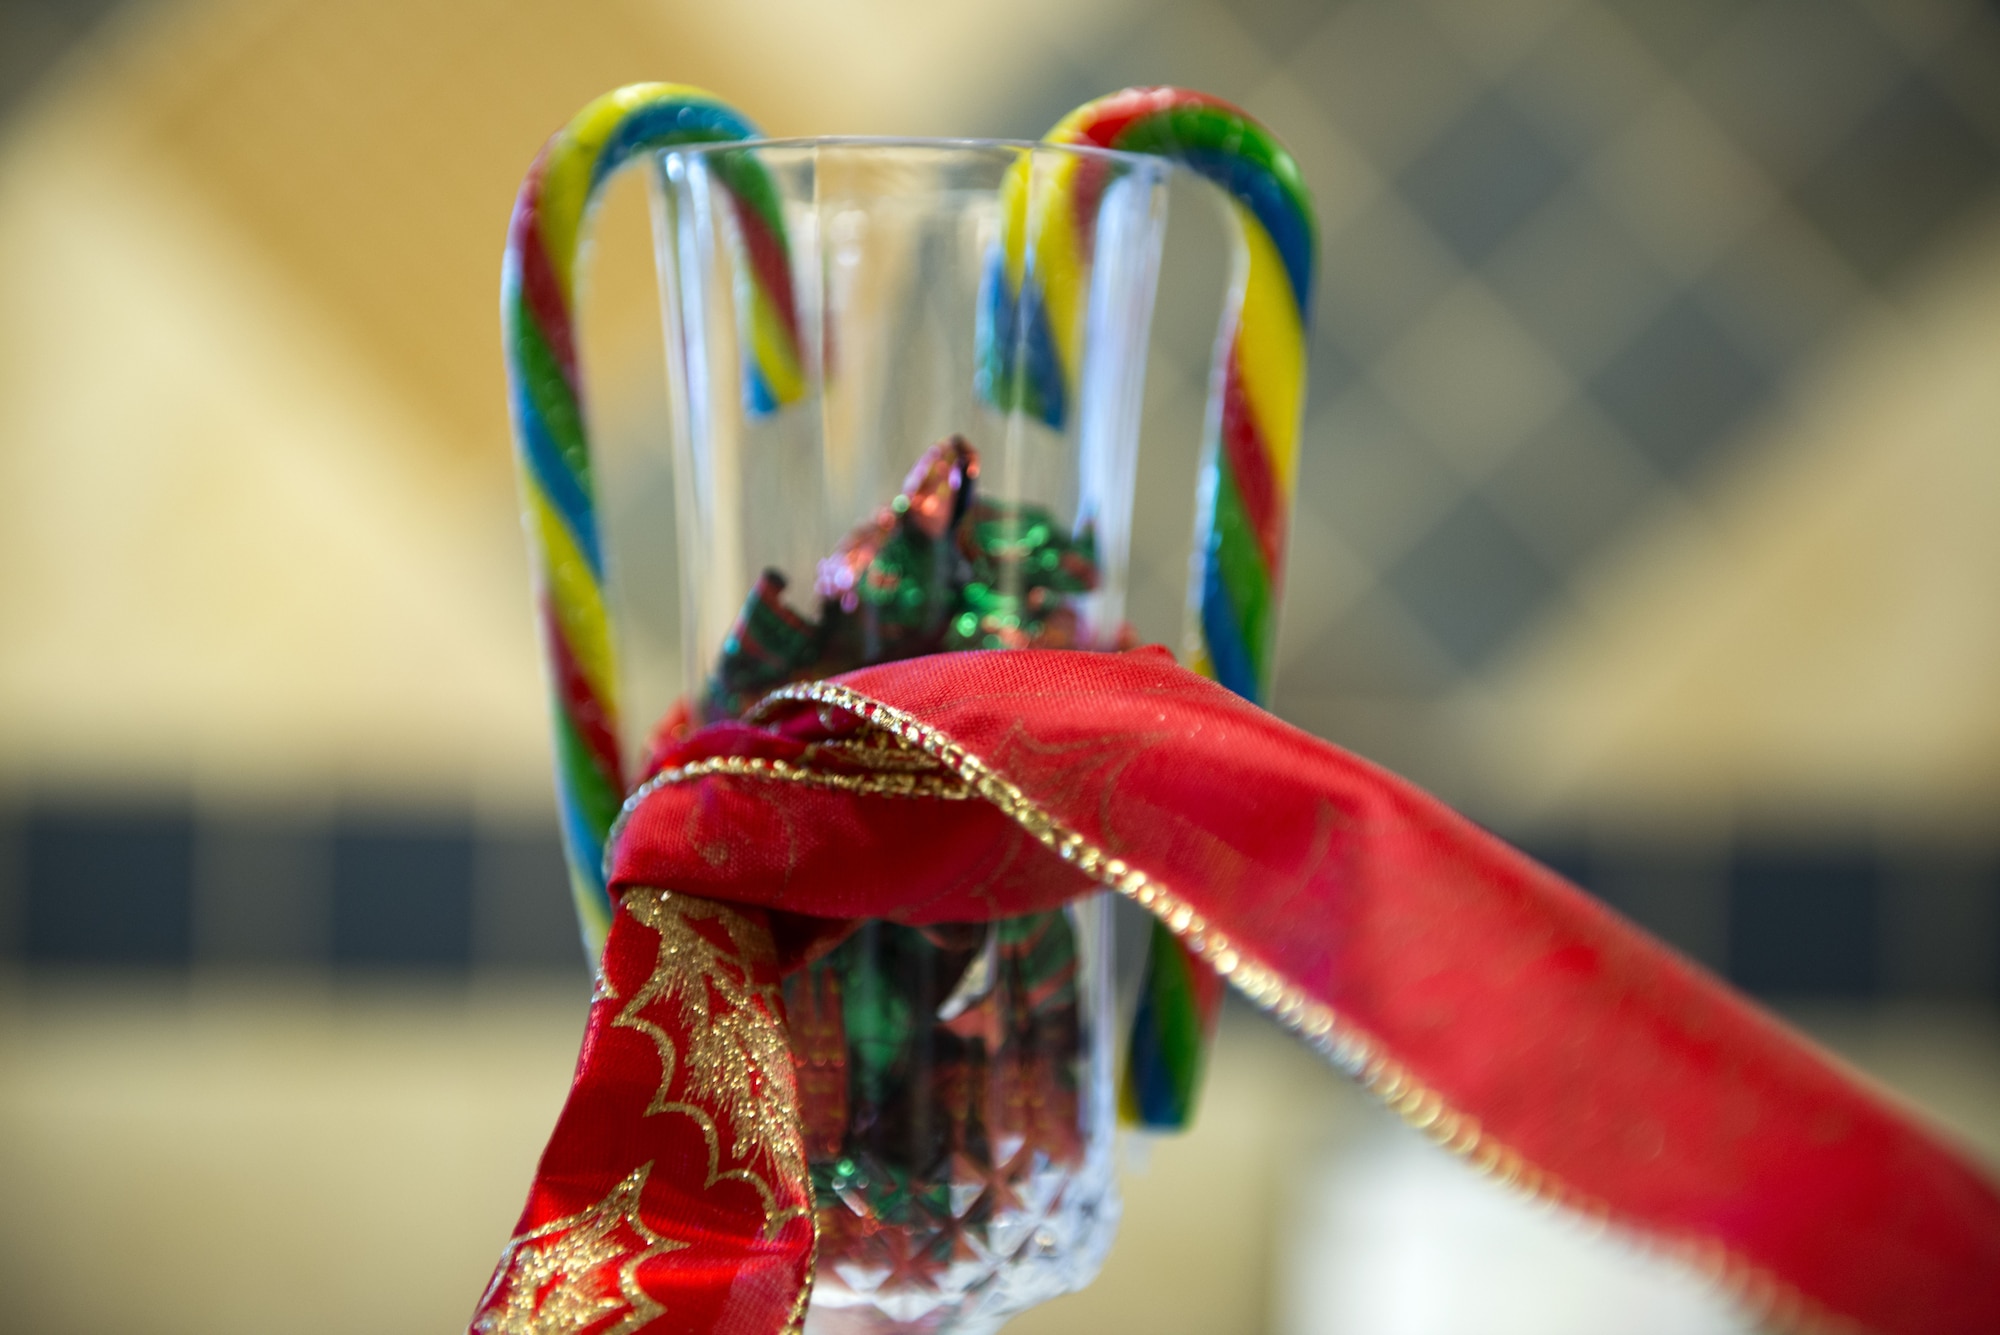 A Christmas decoration rests on a counter on Christmas Day in the Georgia Pines Dining Facility, Dec. 25, 2017, at Moody Air Force Base, Ga. The Christmas meal was an opportunity for Airmen, retirees, dependents and leadership to enjoy a traditional Christmas meal. (U.S. Air Force photo by Airman 1st Class Erick Requadt)